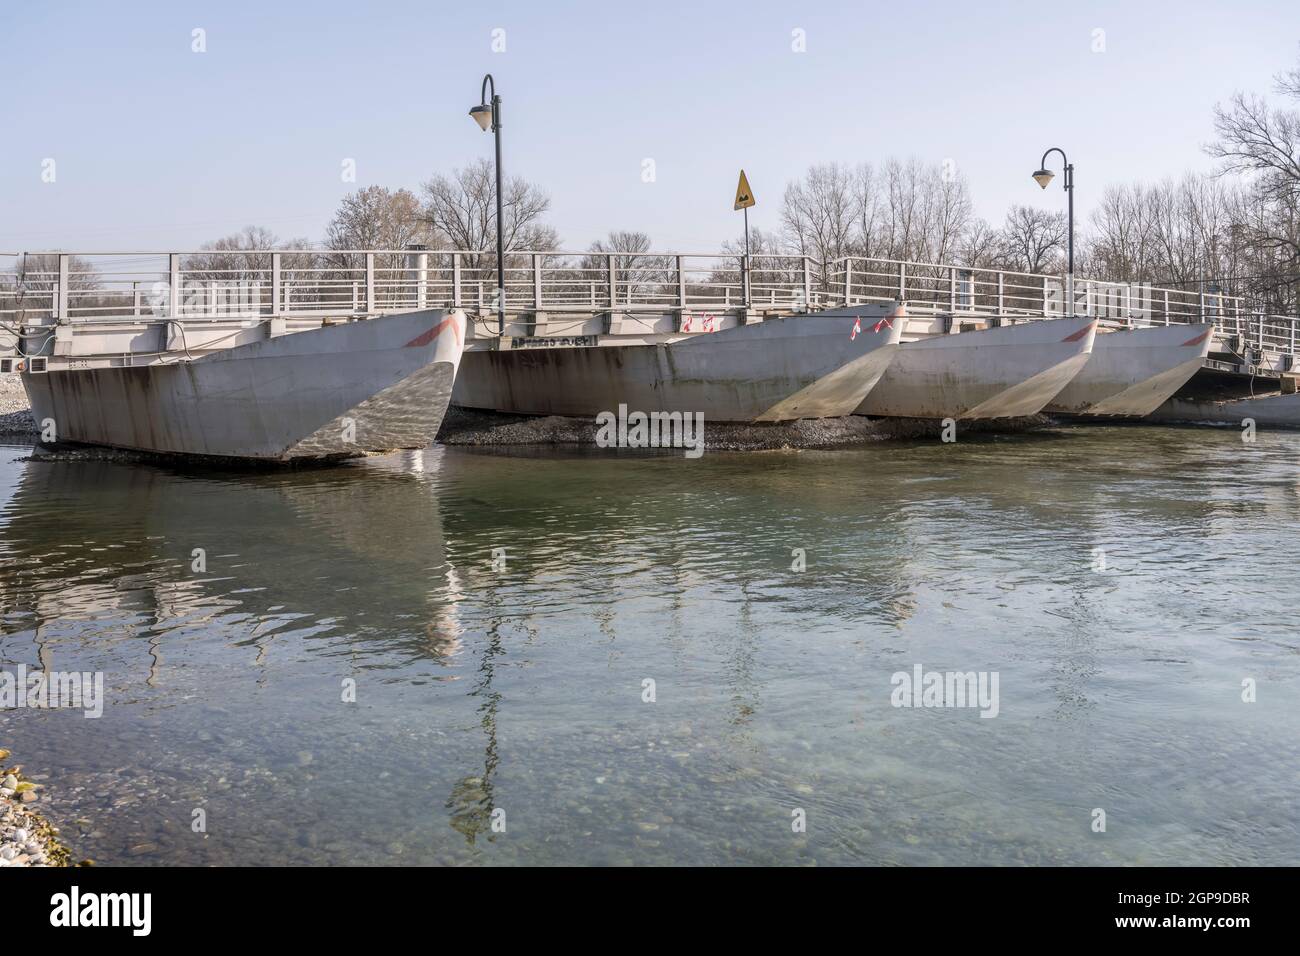 pontoon bridge on Ticino river clear waters, shot on bright winter day at Bereguardo, Pavia, Lombardy, Italy Stock Photo